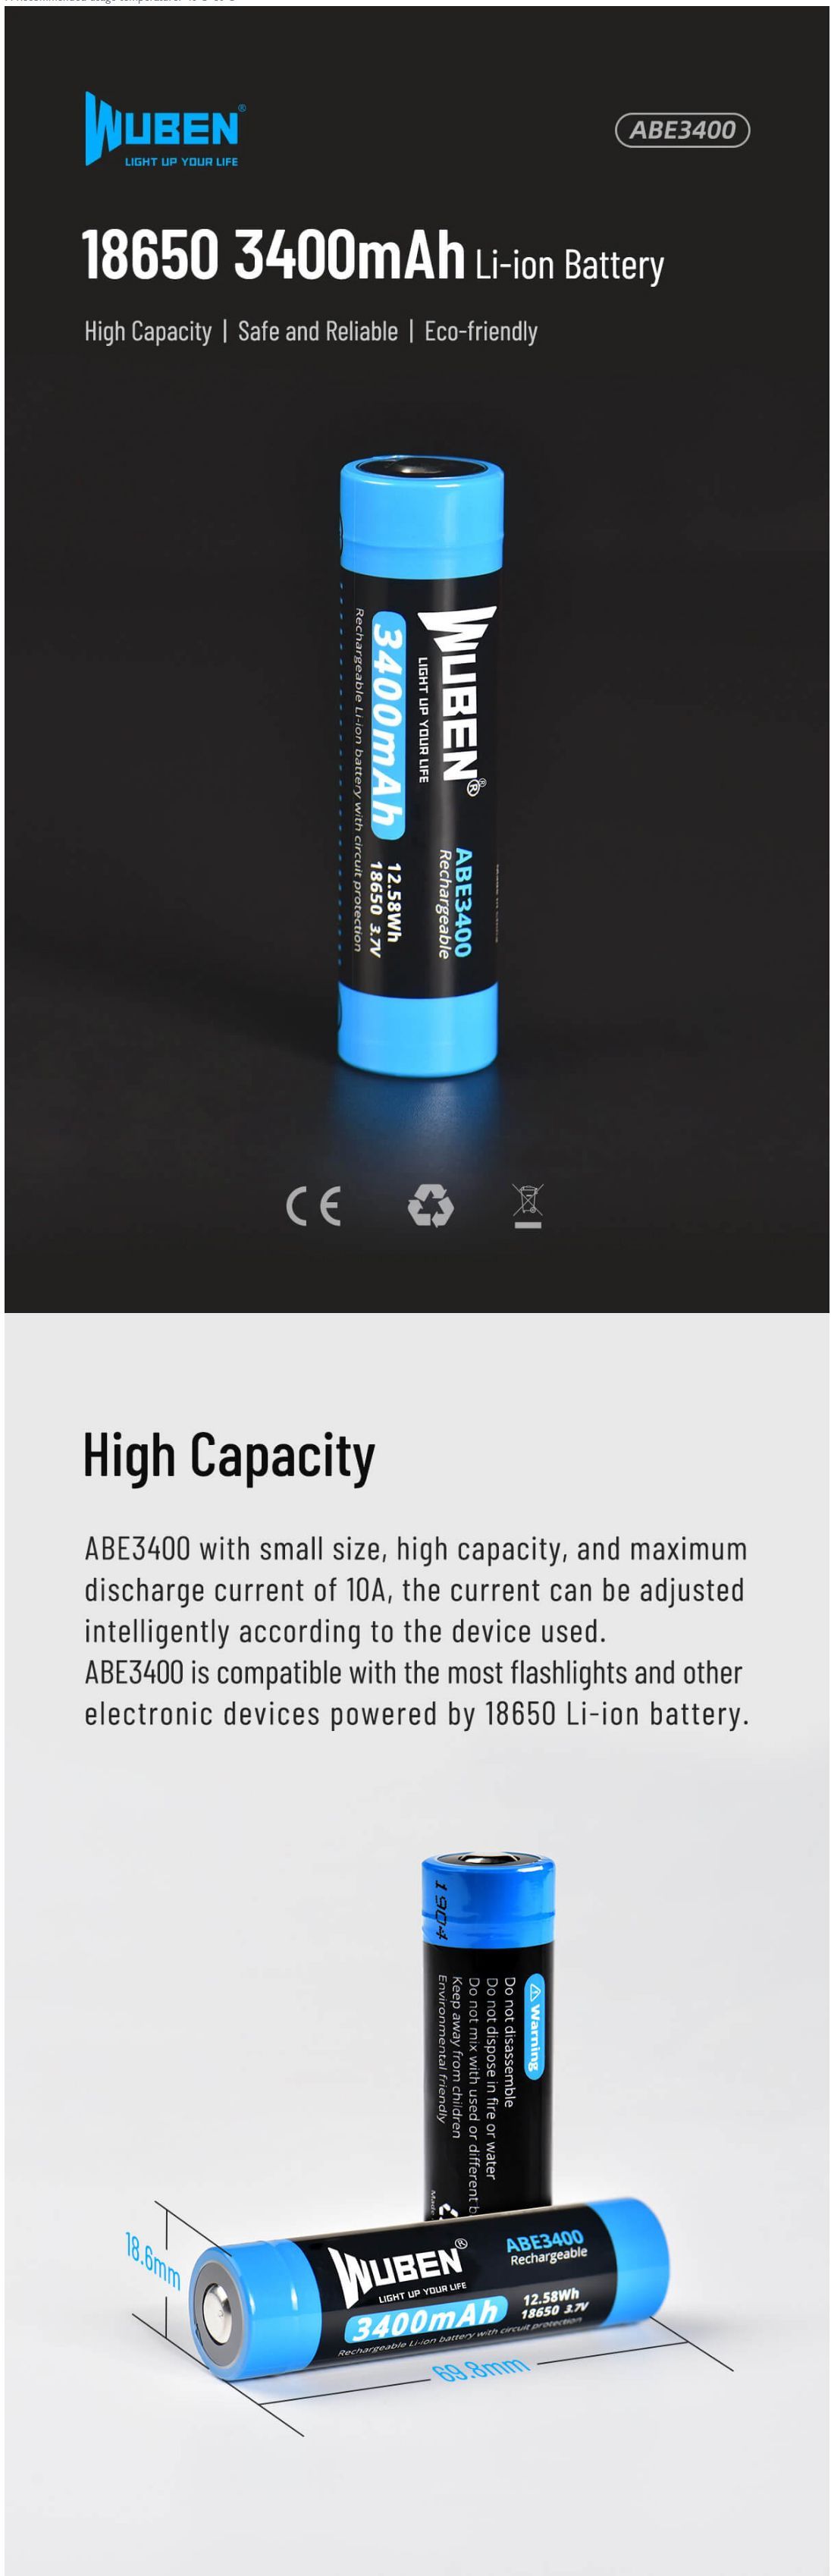 WUBEN-ABE3400-18650-34000mAh-Rechargeable-Protected-Lithium-Battery-High-Capacity-Li-battery-For-Fla-1730171